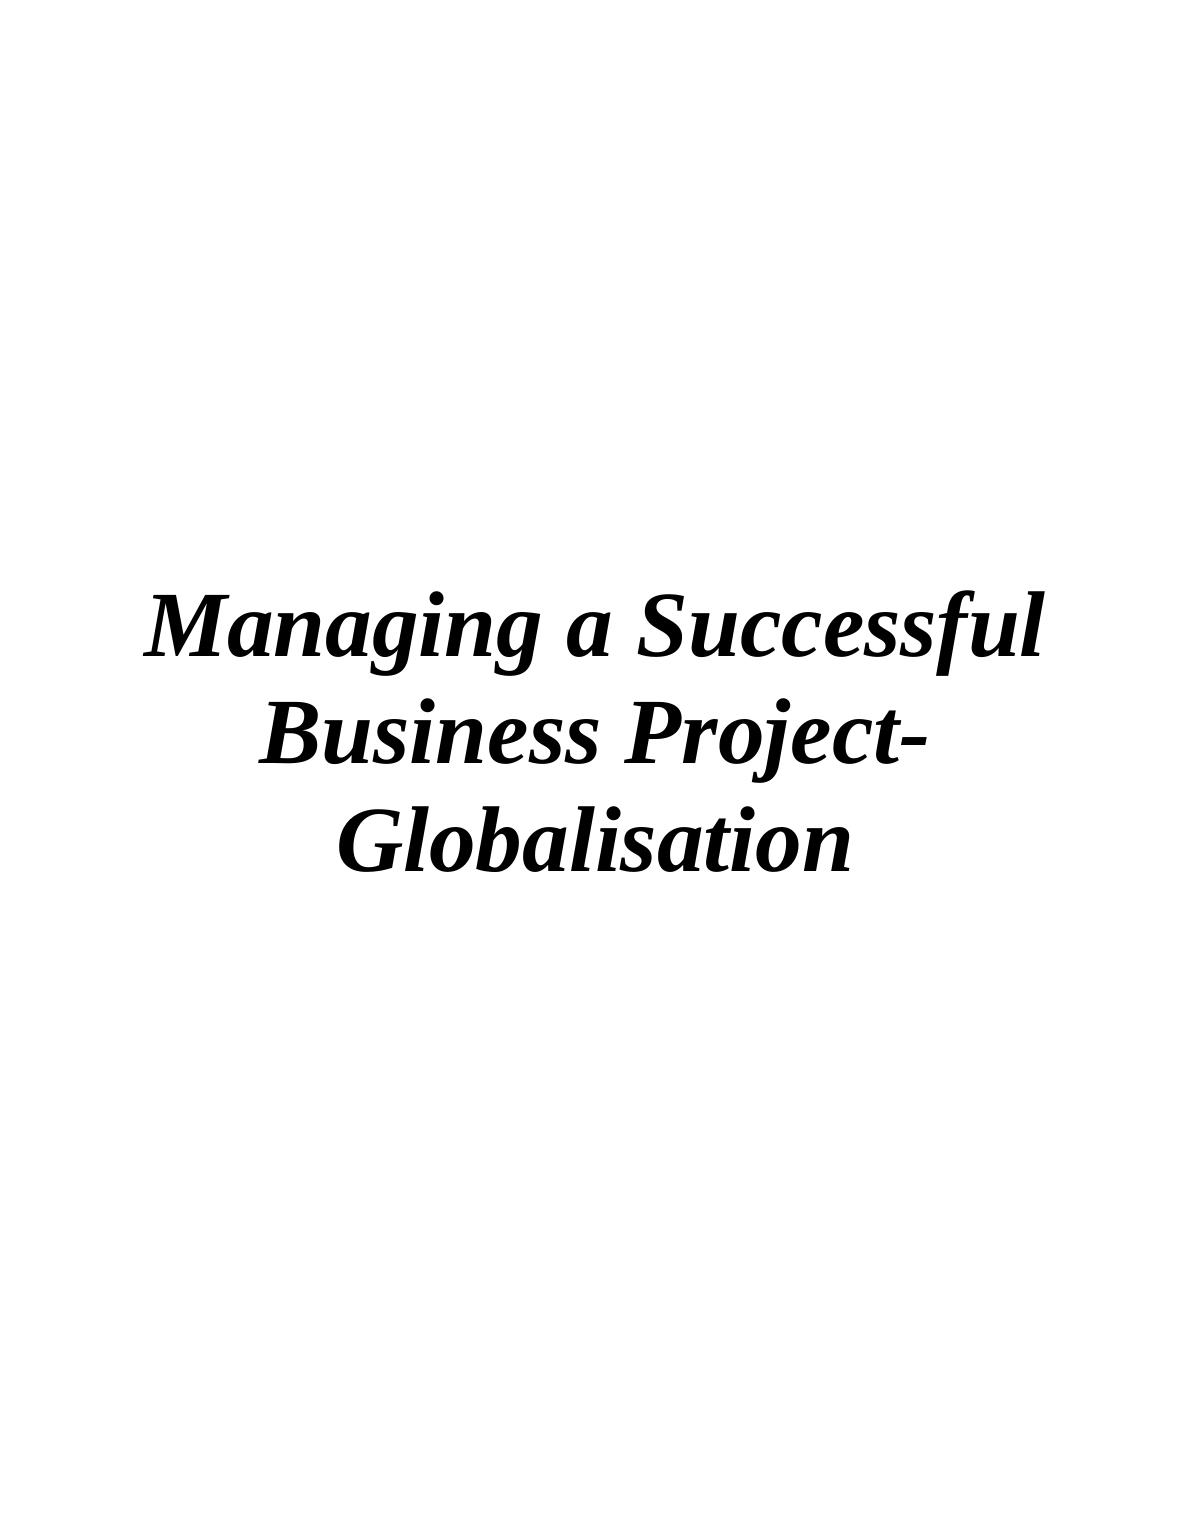 Managing a Successful Business Project   Assignment PDF_1